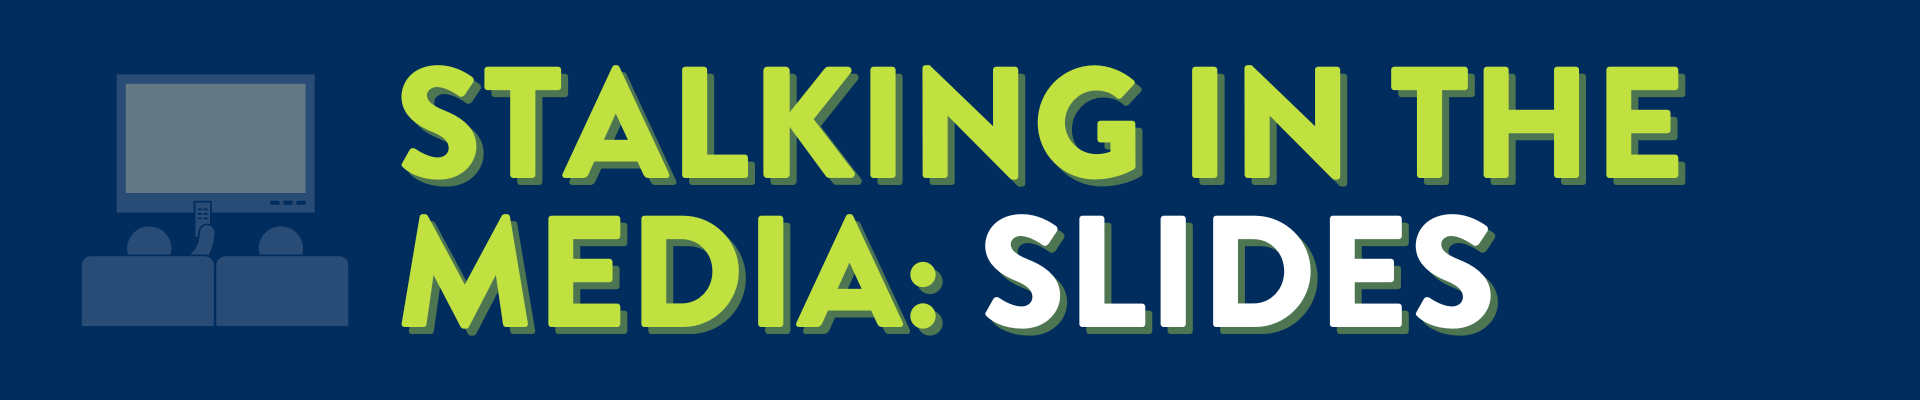 Blue background with green text that says, "stalking in the media: slides"